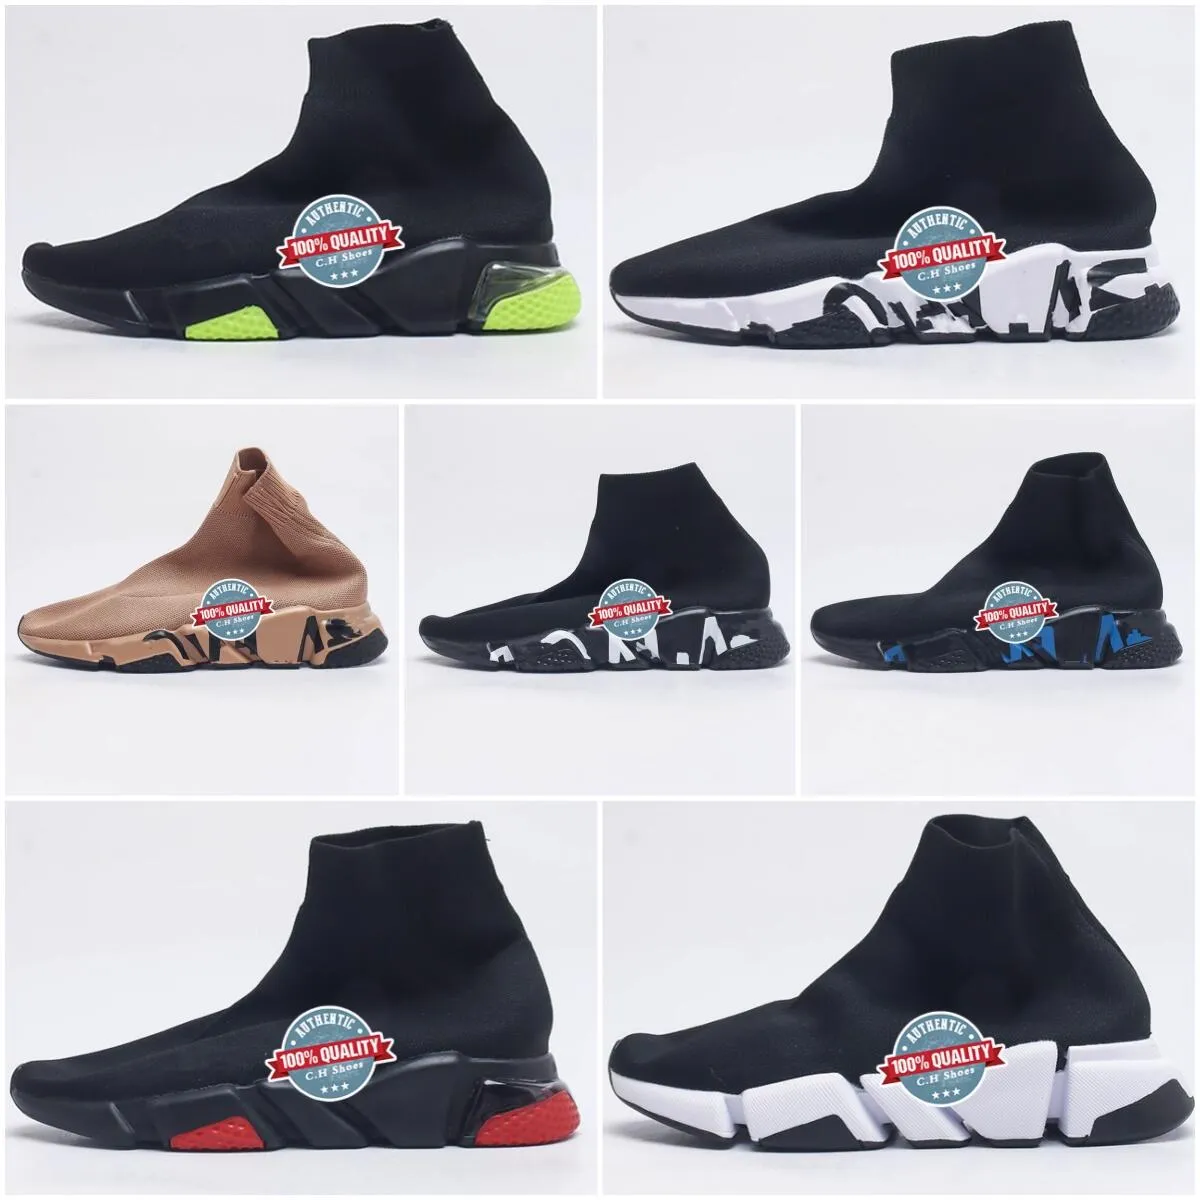 Top Designer sock shoes men women Graffiti White Black Red Beige Pink Clear Sole Lace-up Neon luxury socks speed runner trainers flat platform sneakers casual shoes